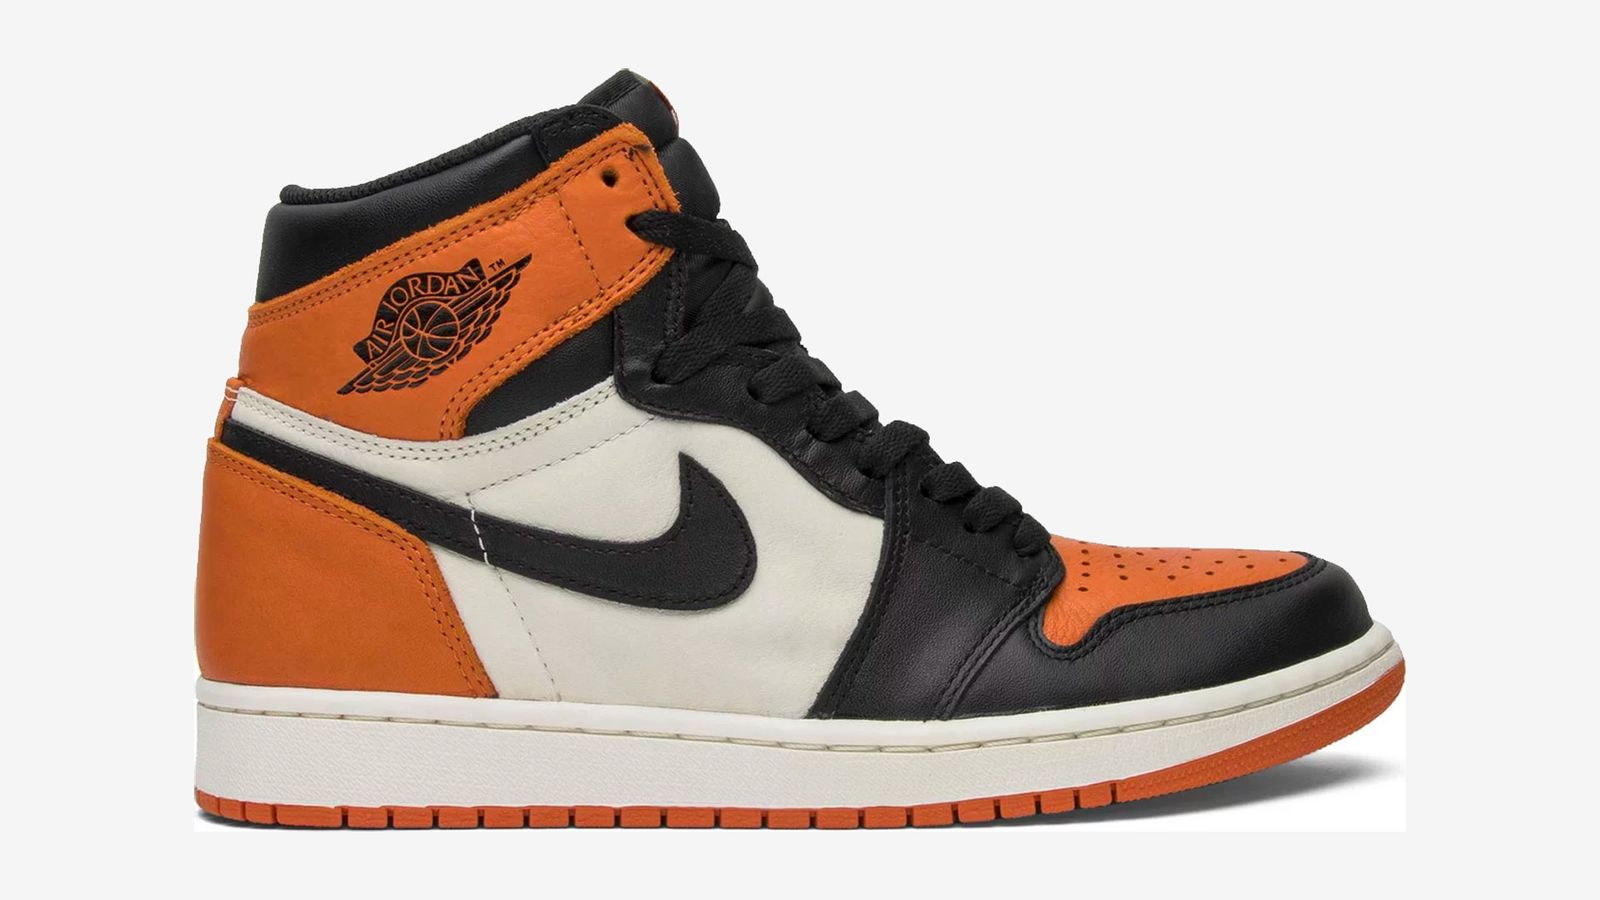 Air Jordan 1 Retro "Shattered Backboard" product image of a white, orange, and black high-top sneaker.